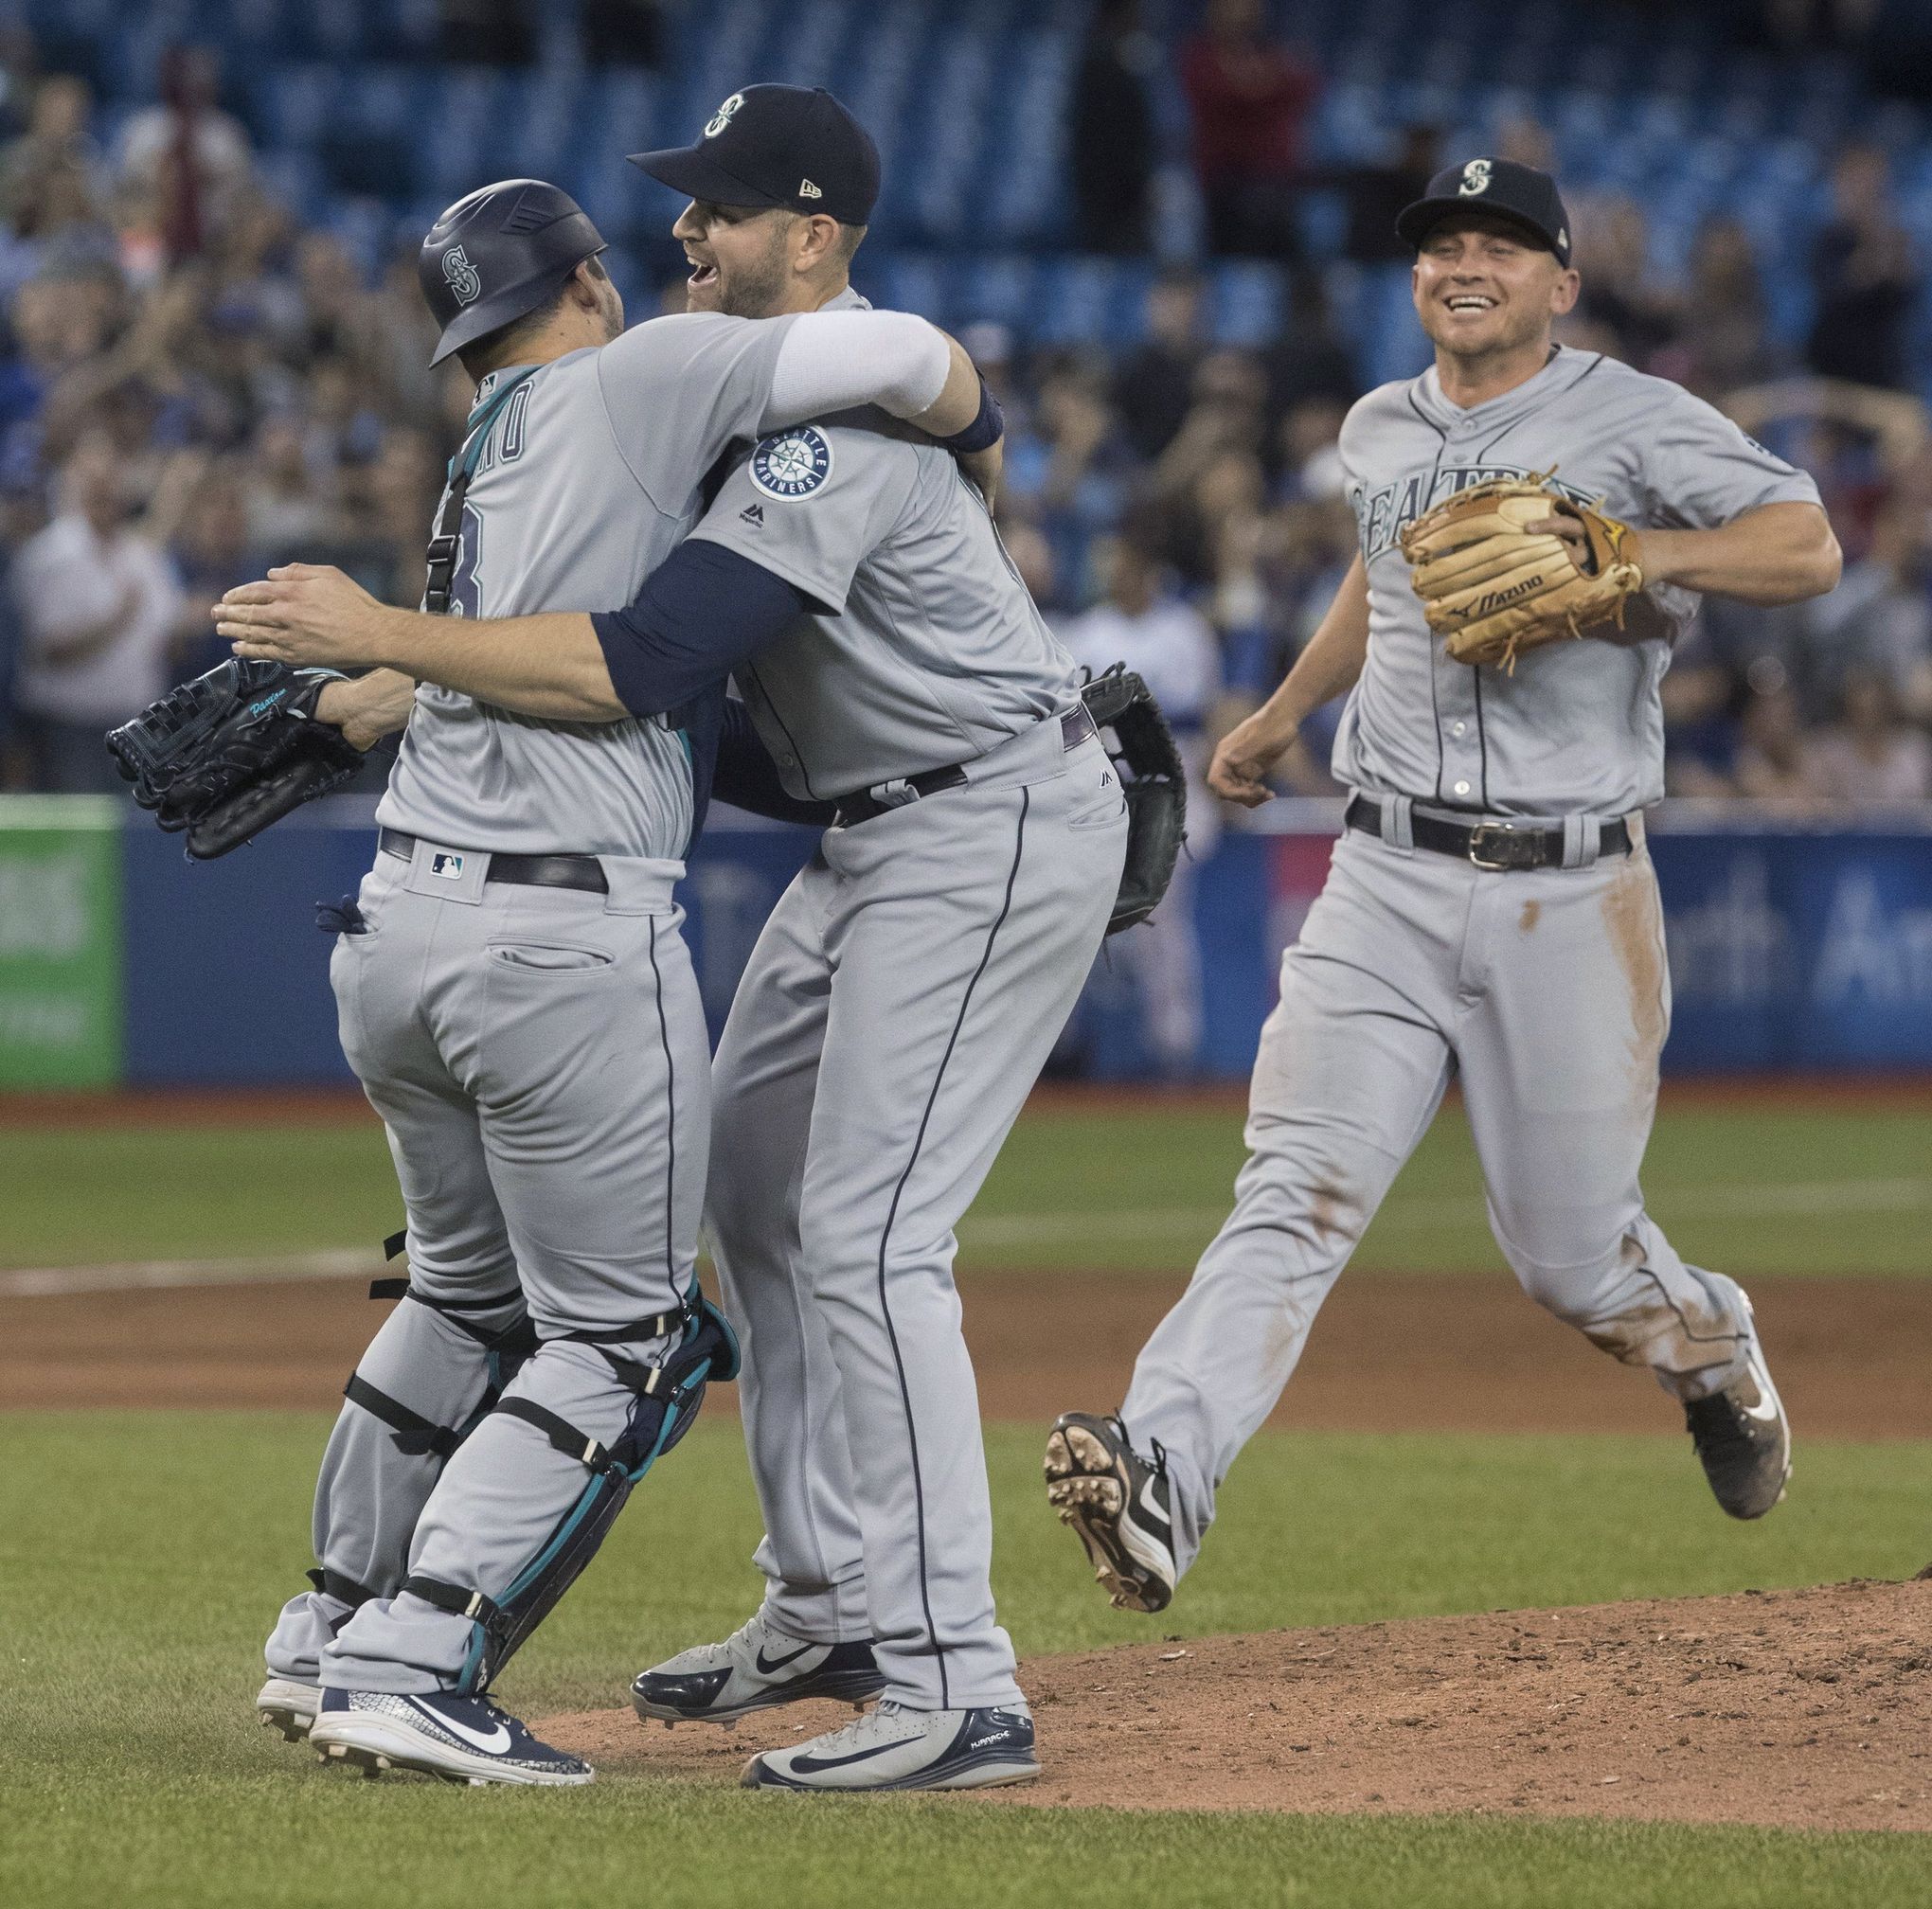 No-Canada! Mariners' Paxton pitches no-hitter in Toronto